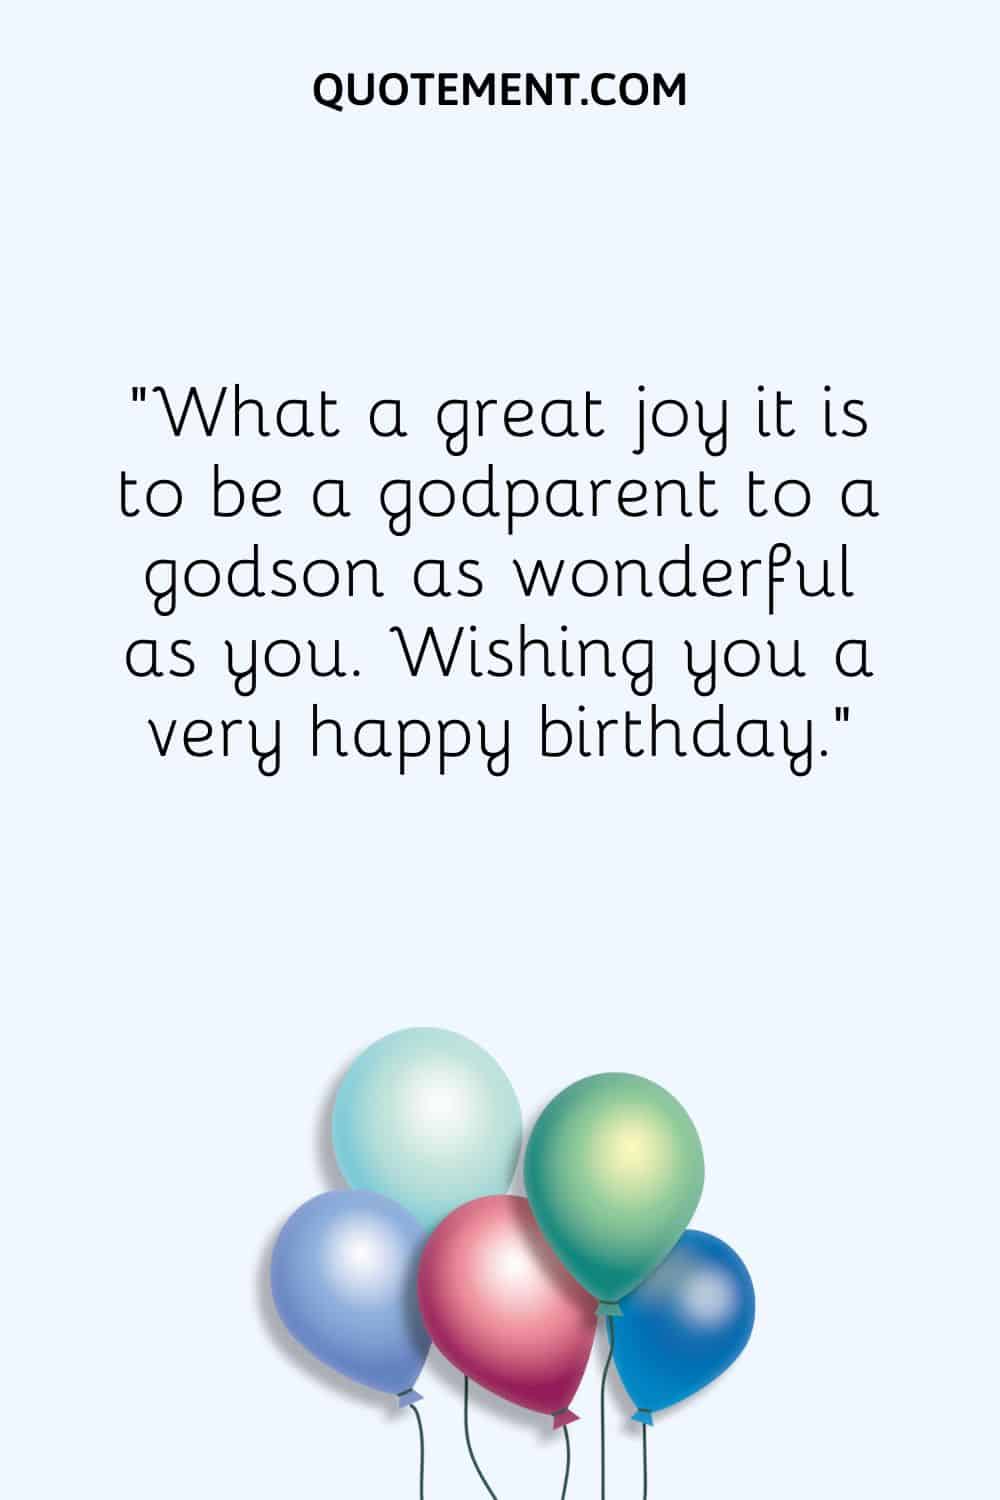 “What a great joy it is to be a godparent to a godson as wonderful as you. Wishing you a very happy birthday.”